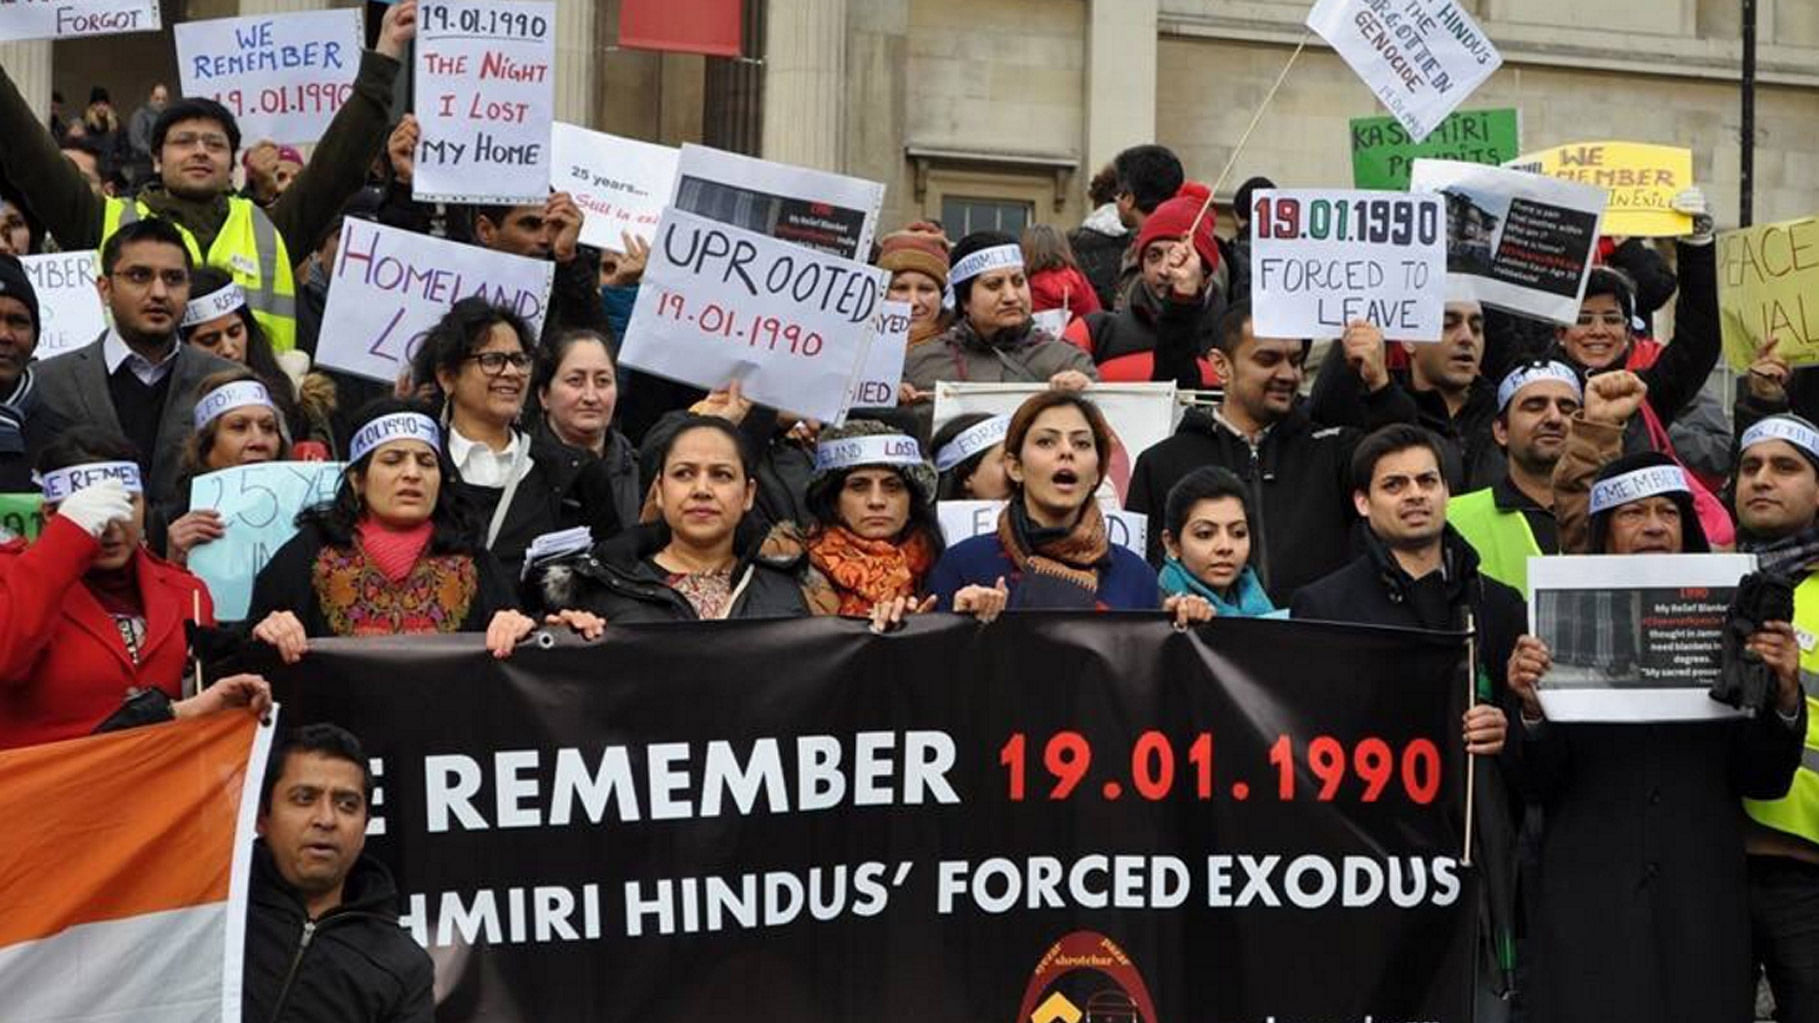  Protests in remembrance of the day that drove any Kashmiri Pandit’s out of the Kashmir valley. (Photo Courtesy: Twitter/ <a href="https://twitter.com/search?q=pawan%20durani&amp;src=typd">Pawan Durani</a>)